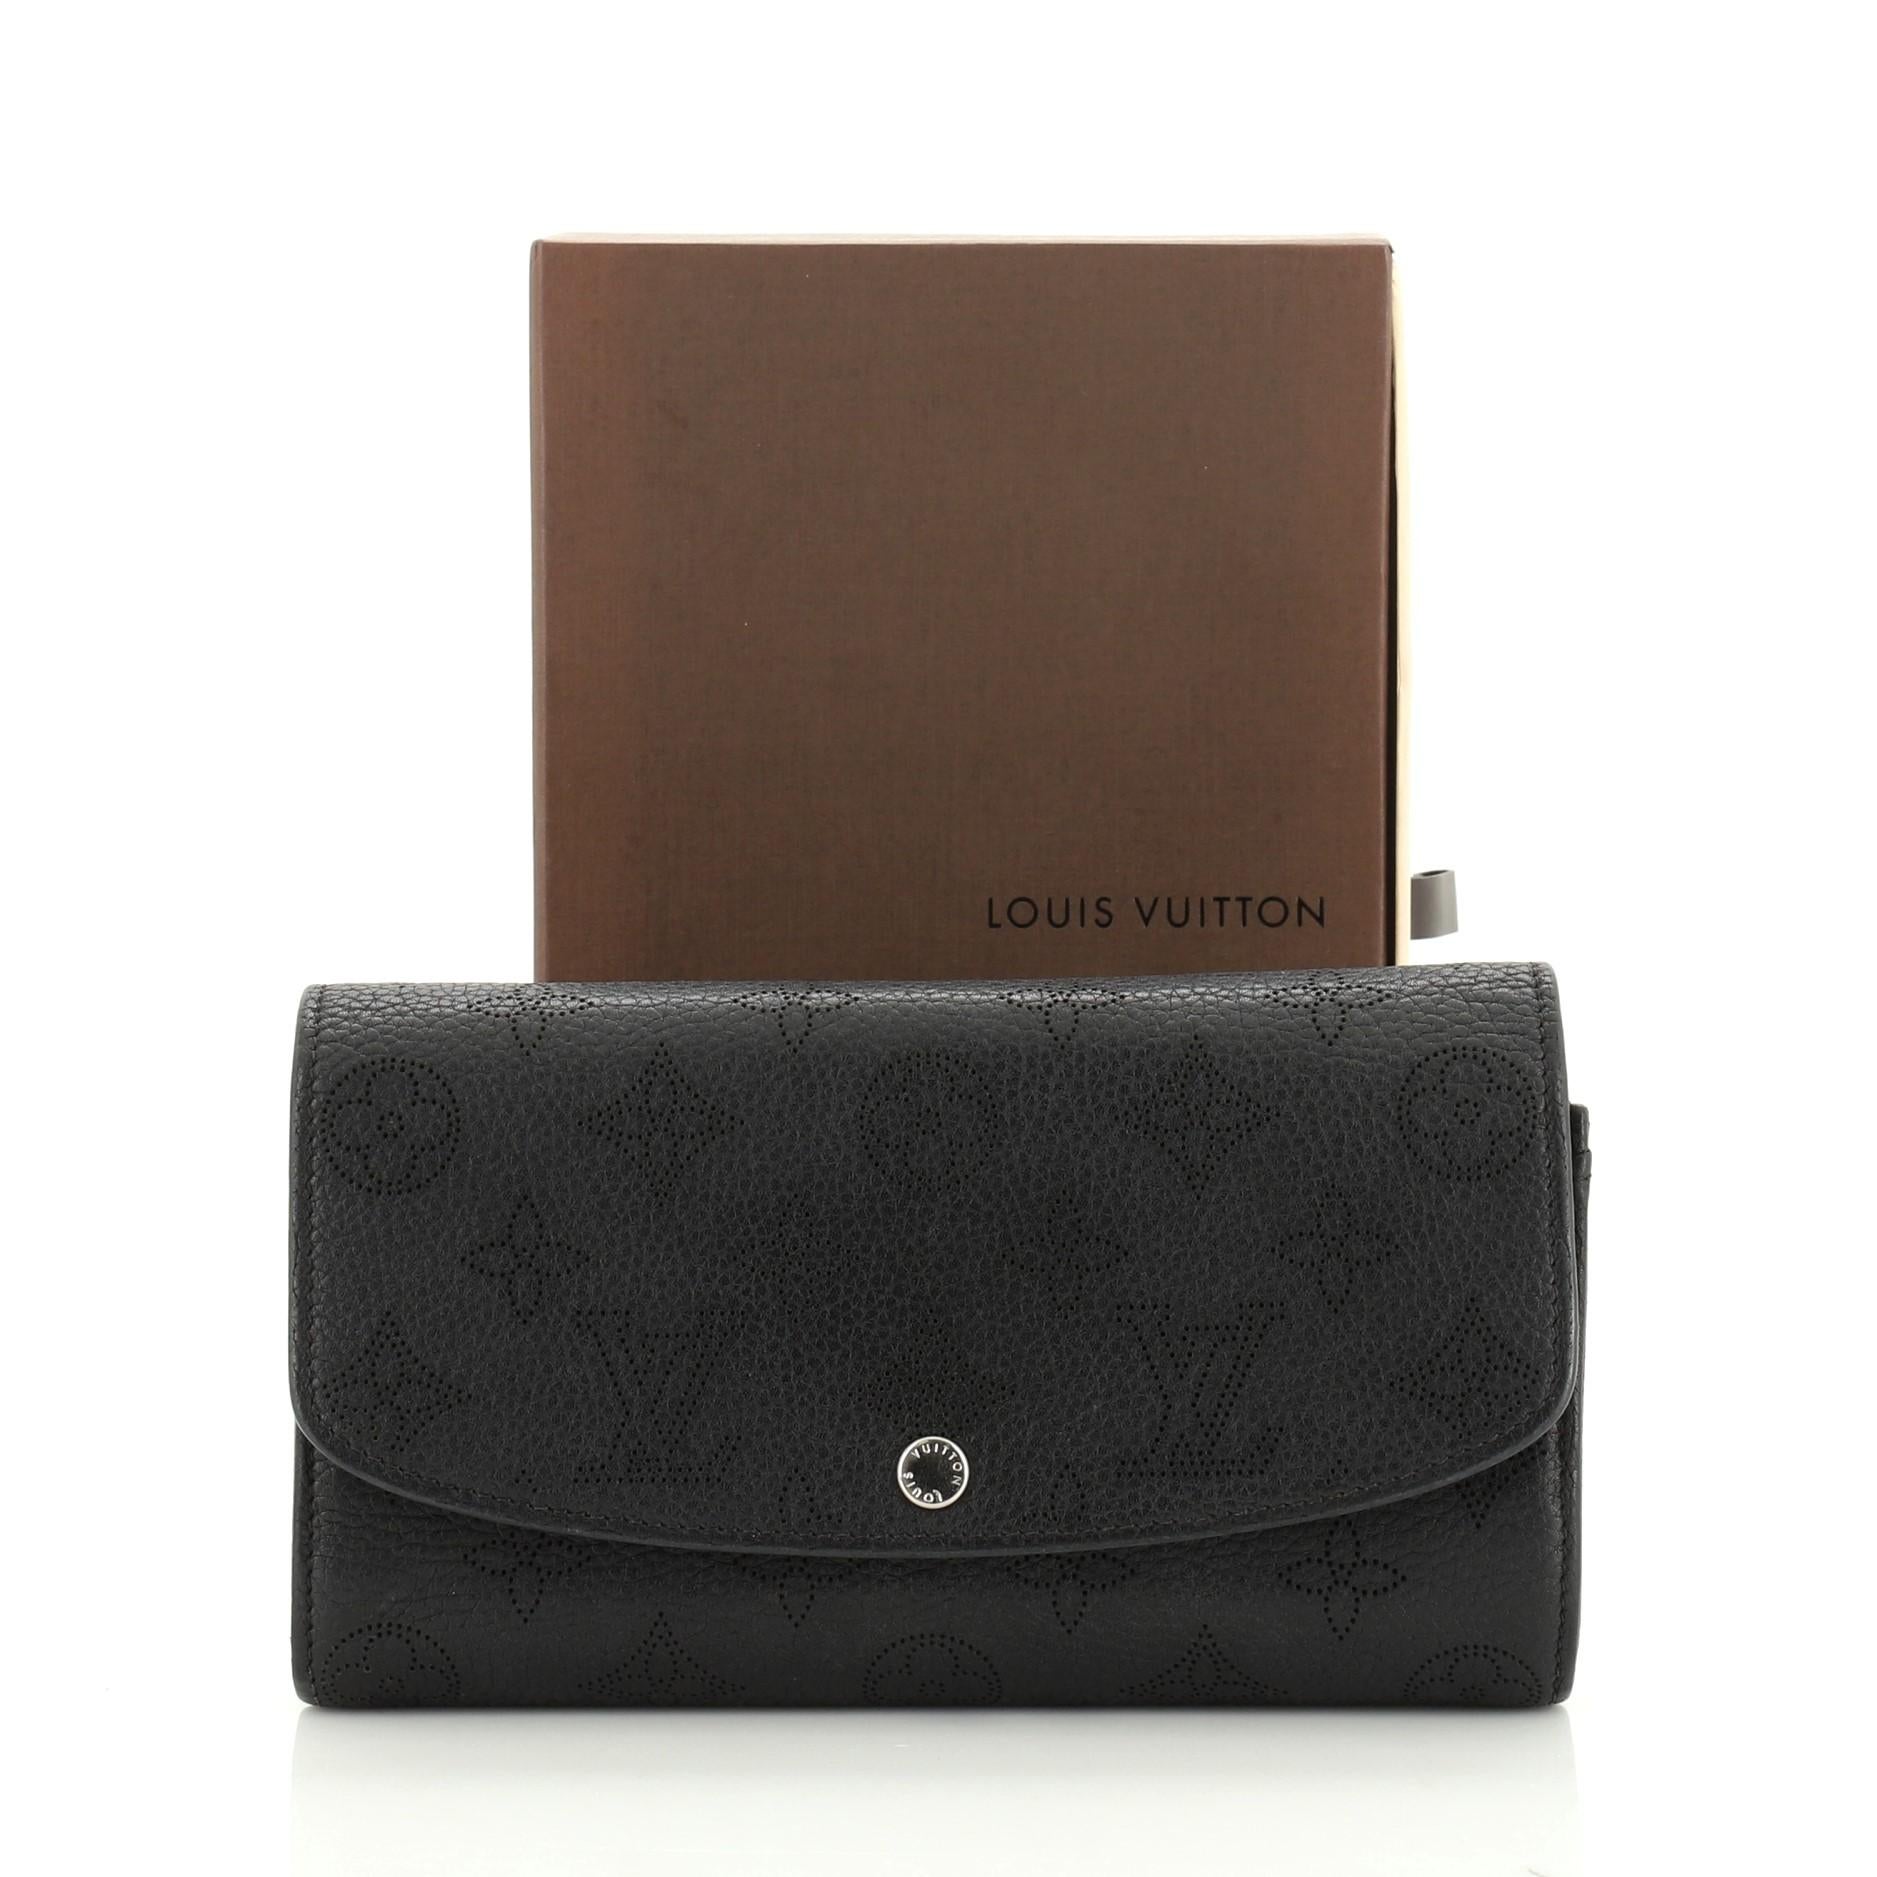 Louis Vuitton Biscuit Mahina Leather Iris Compact Wallet Louis